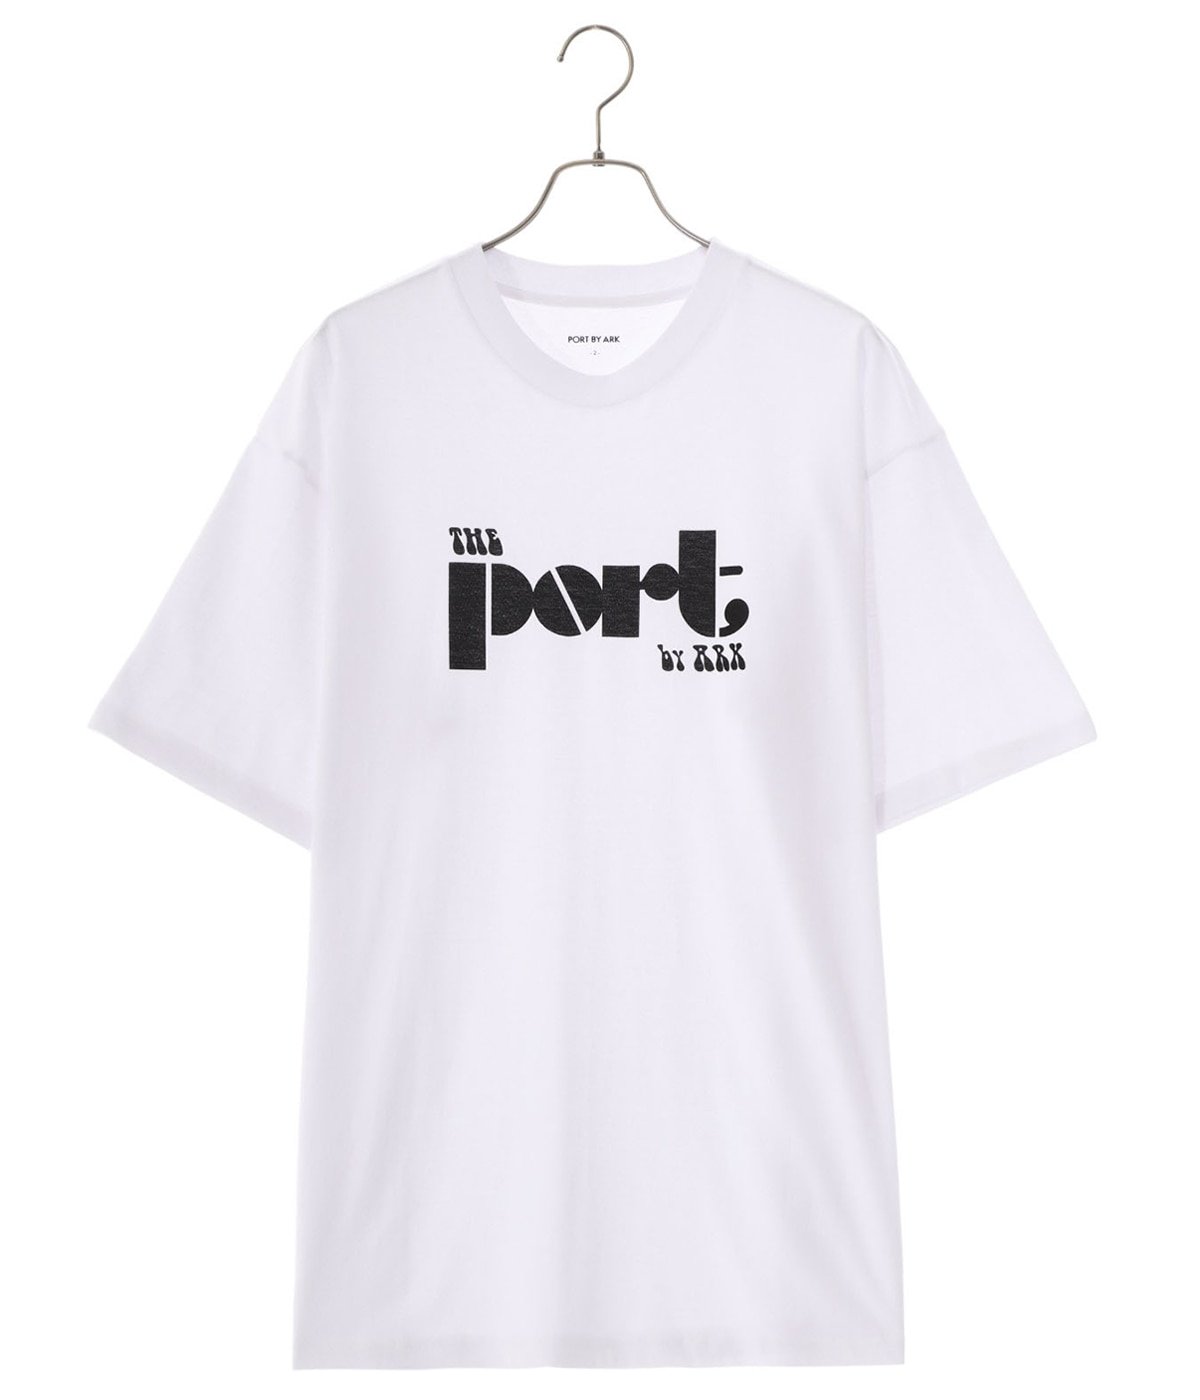 “PORT BY ARK” S/S T-shirt